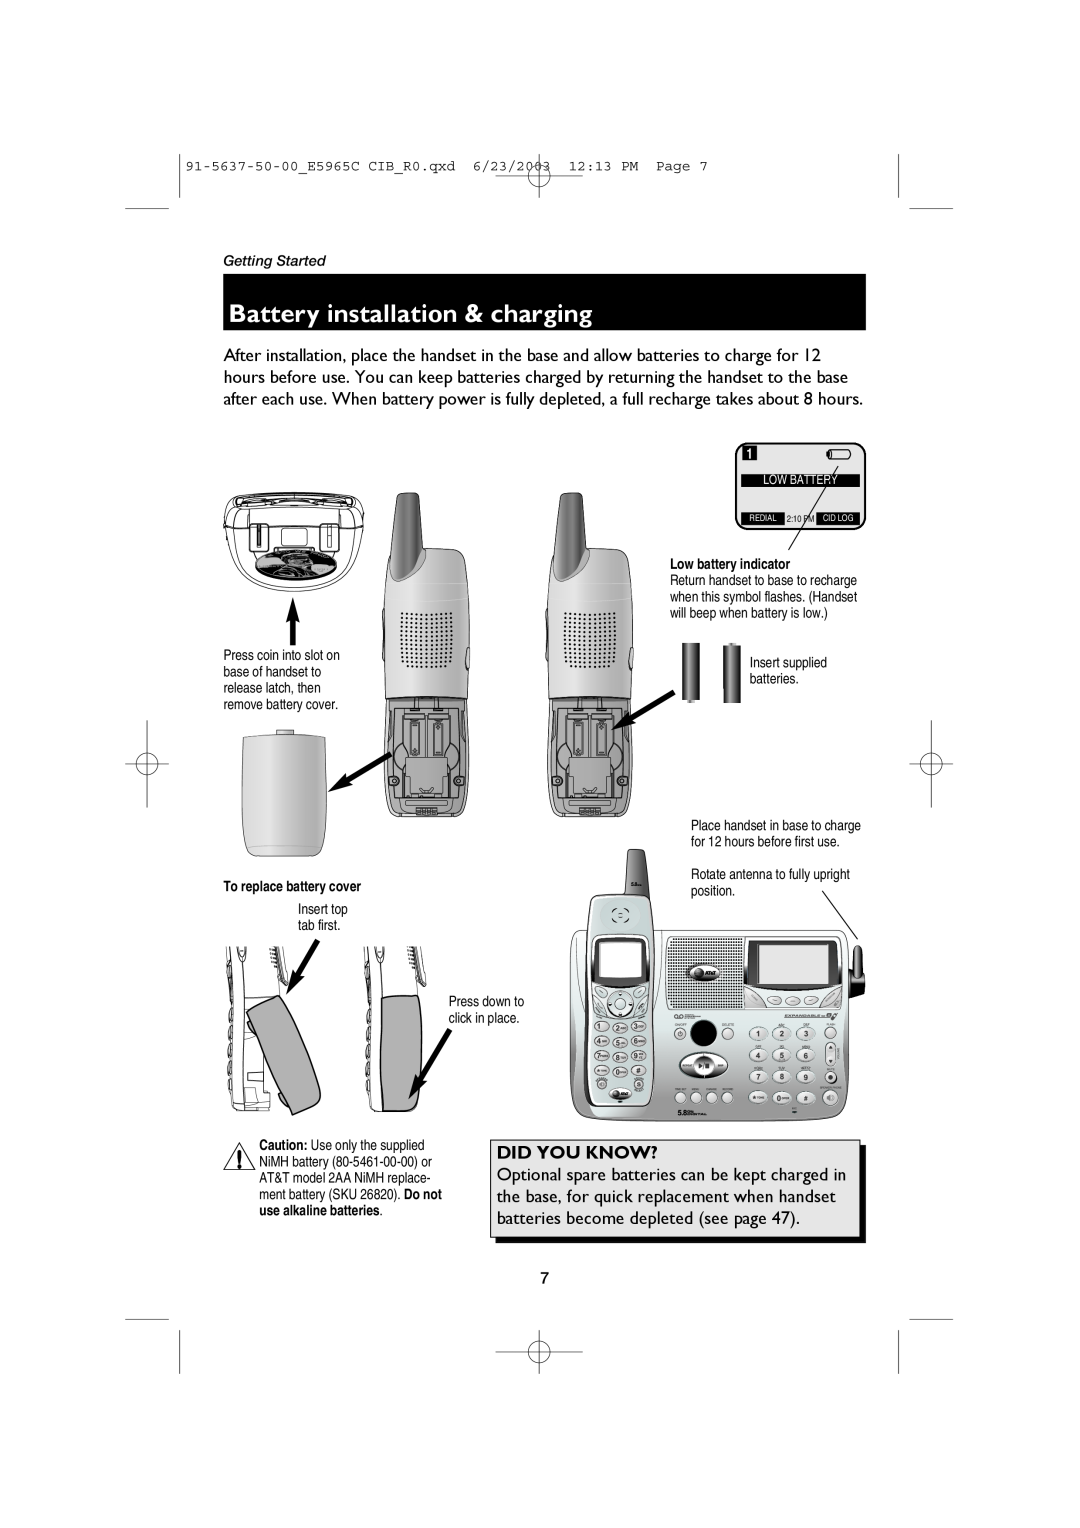 AT&T E5965C Battery installation & charging, Did You Know? Did You Know?, Getting Started, Low battery indicator 